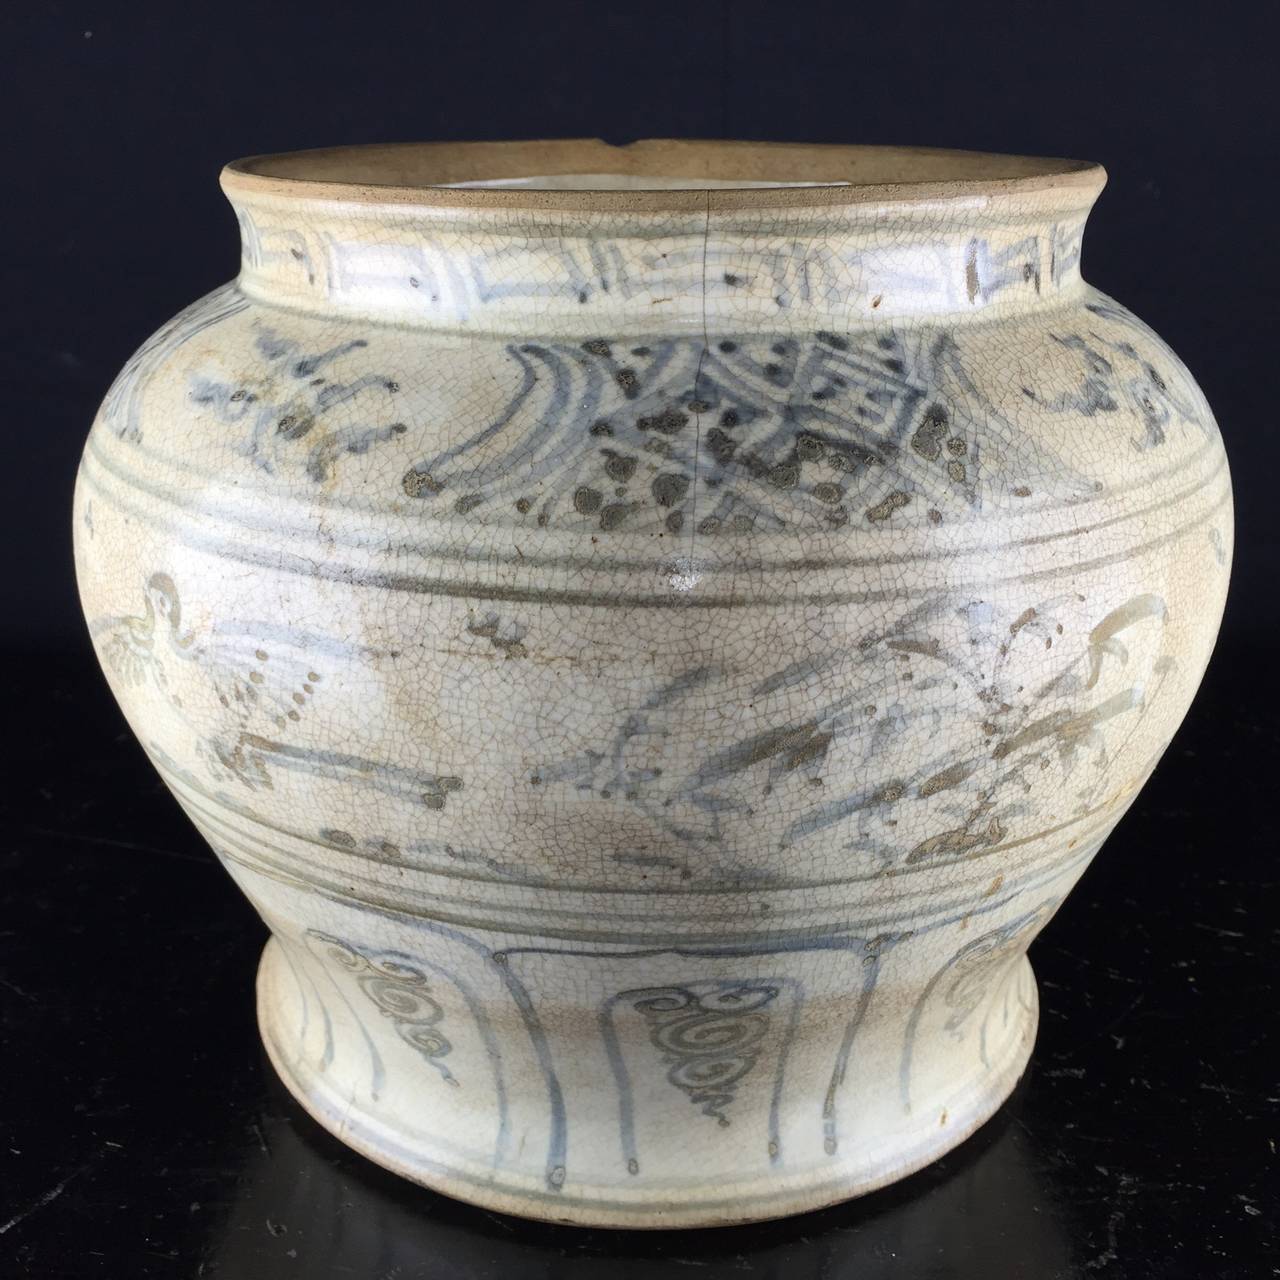 Chinese Export Annamese Vietnamese Baluster Jar with Birds, 15th Century